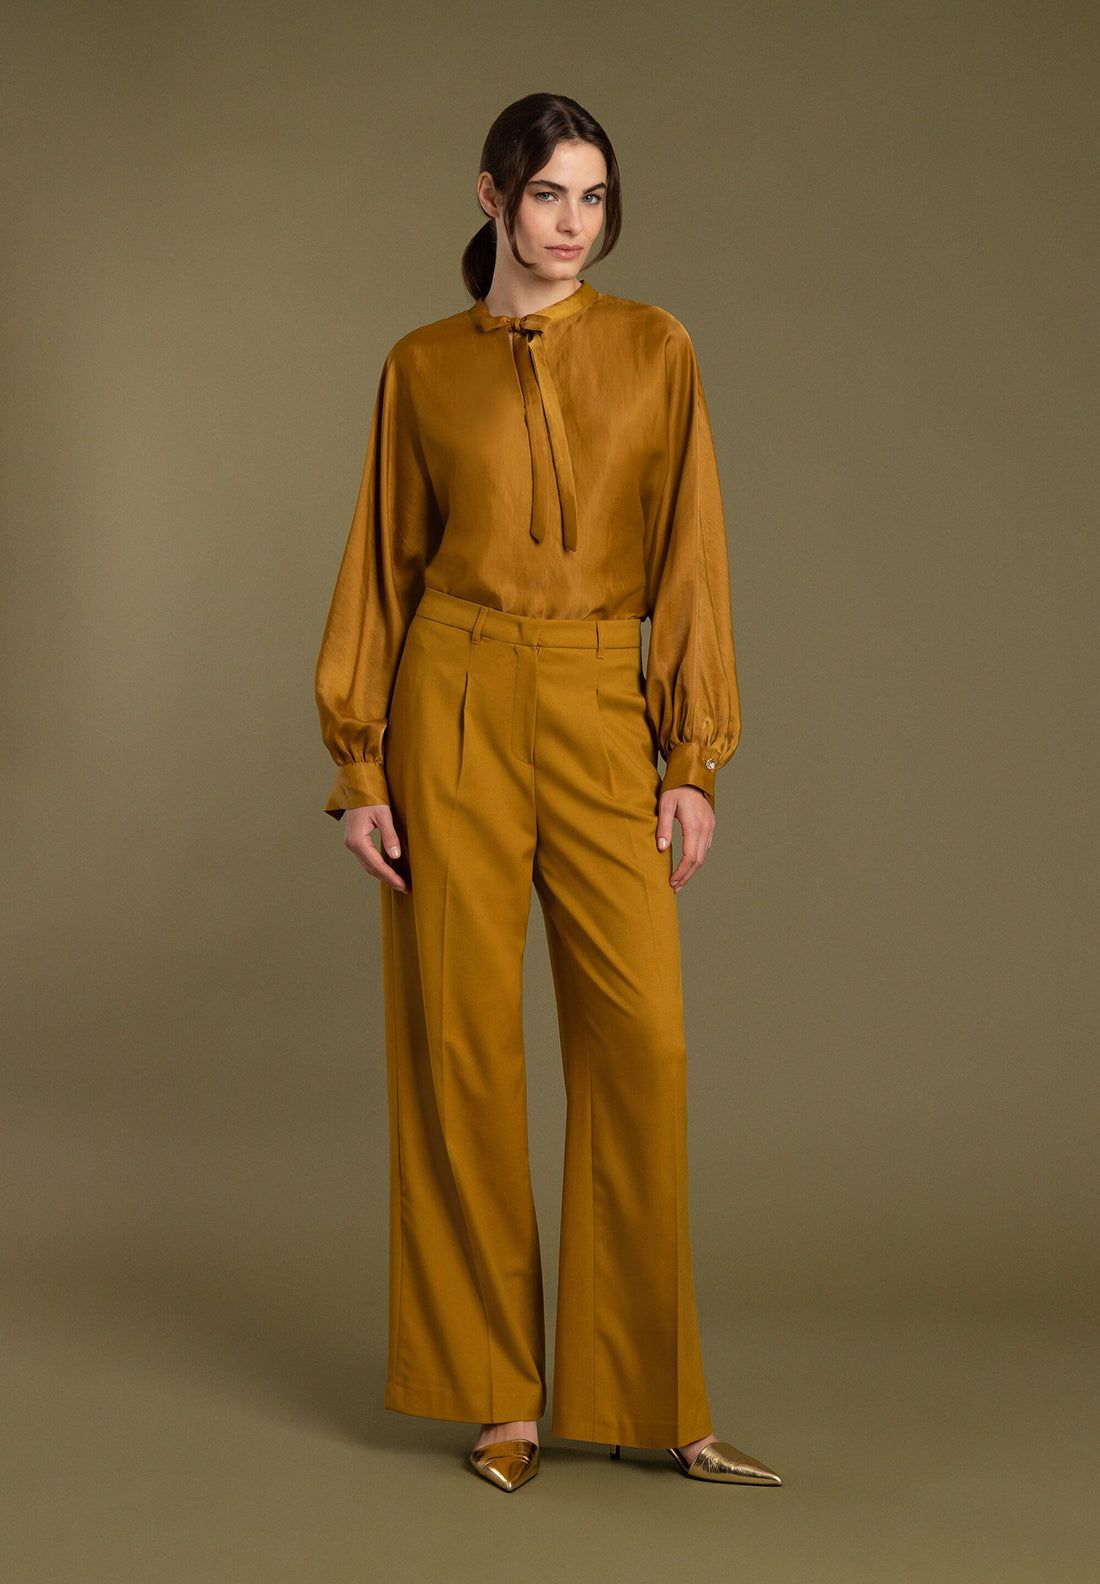 Mustard Yellow Satin Blouse With Bow_31122056_0175_01